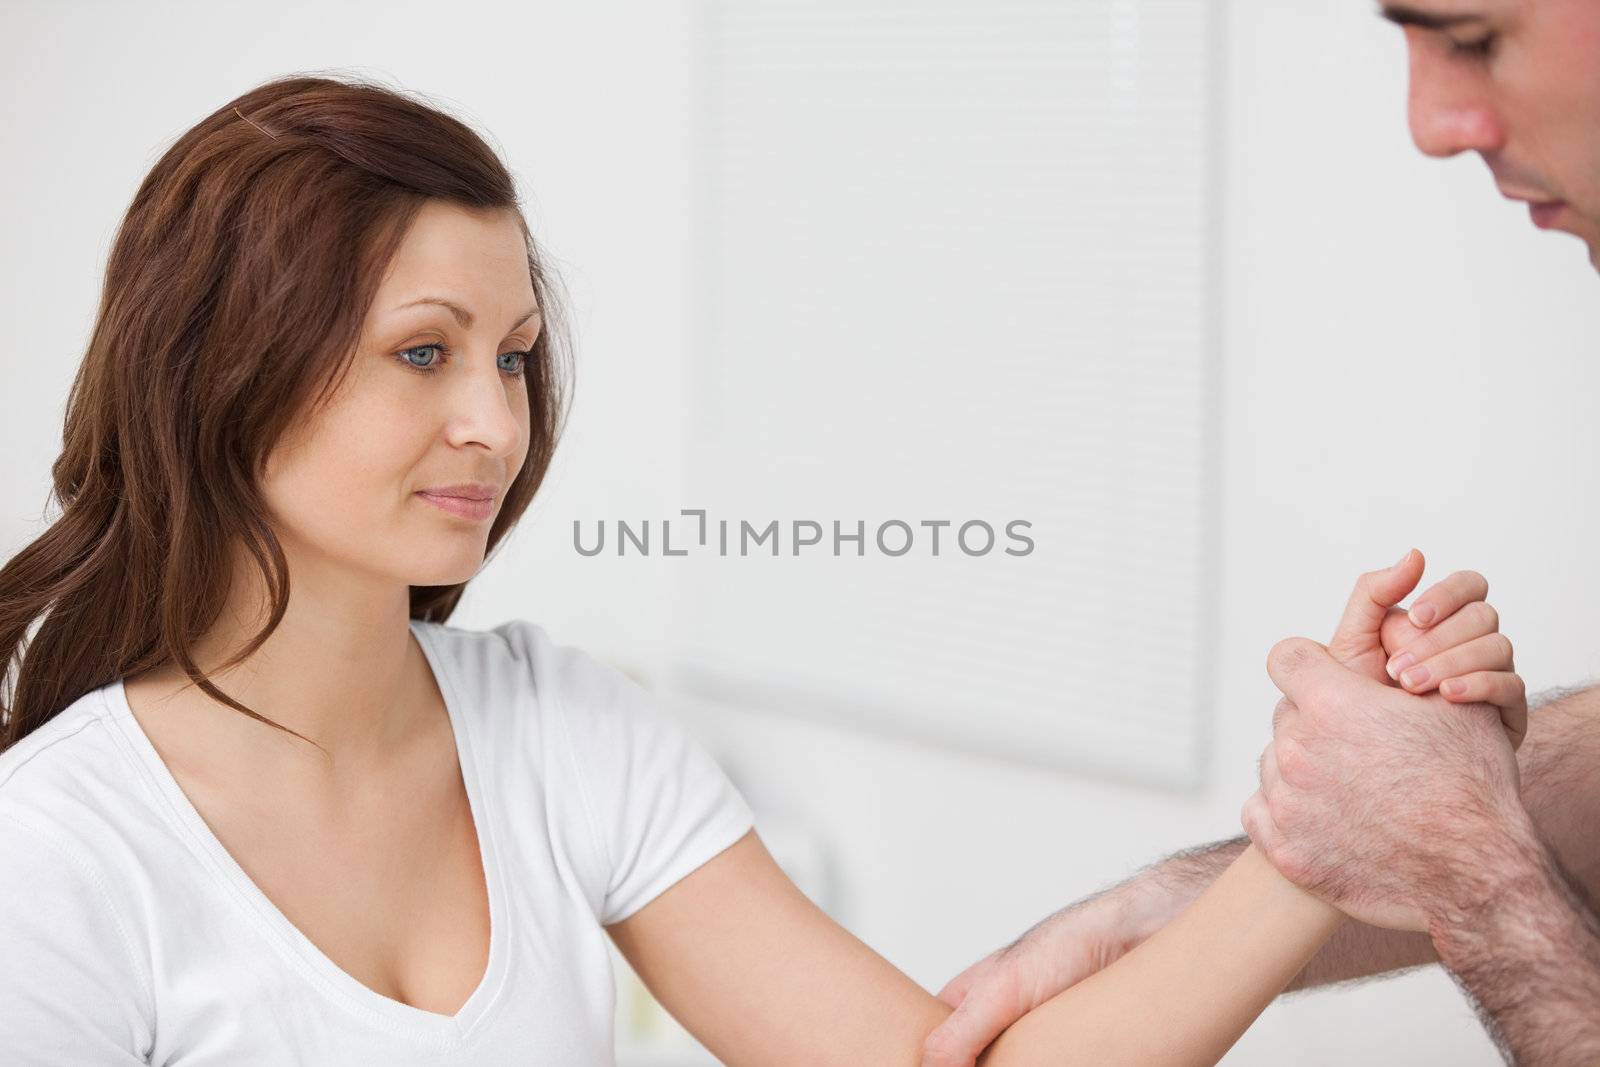 Woman sitting while a man examine her arm in a room